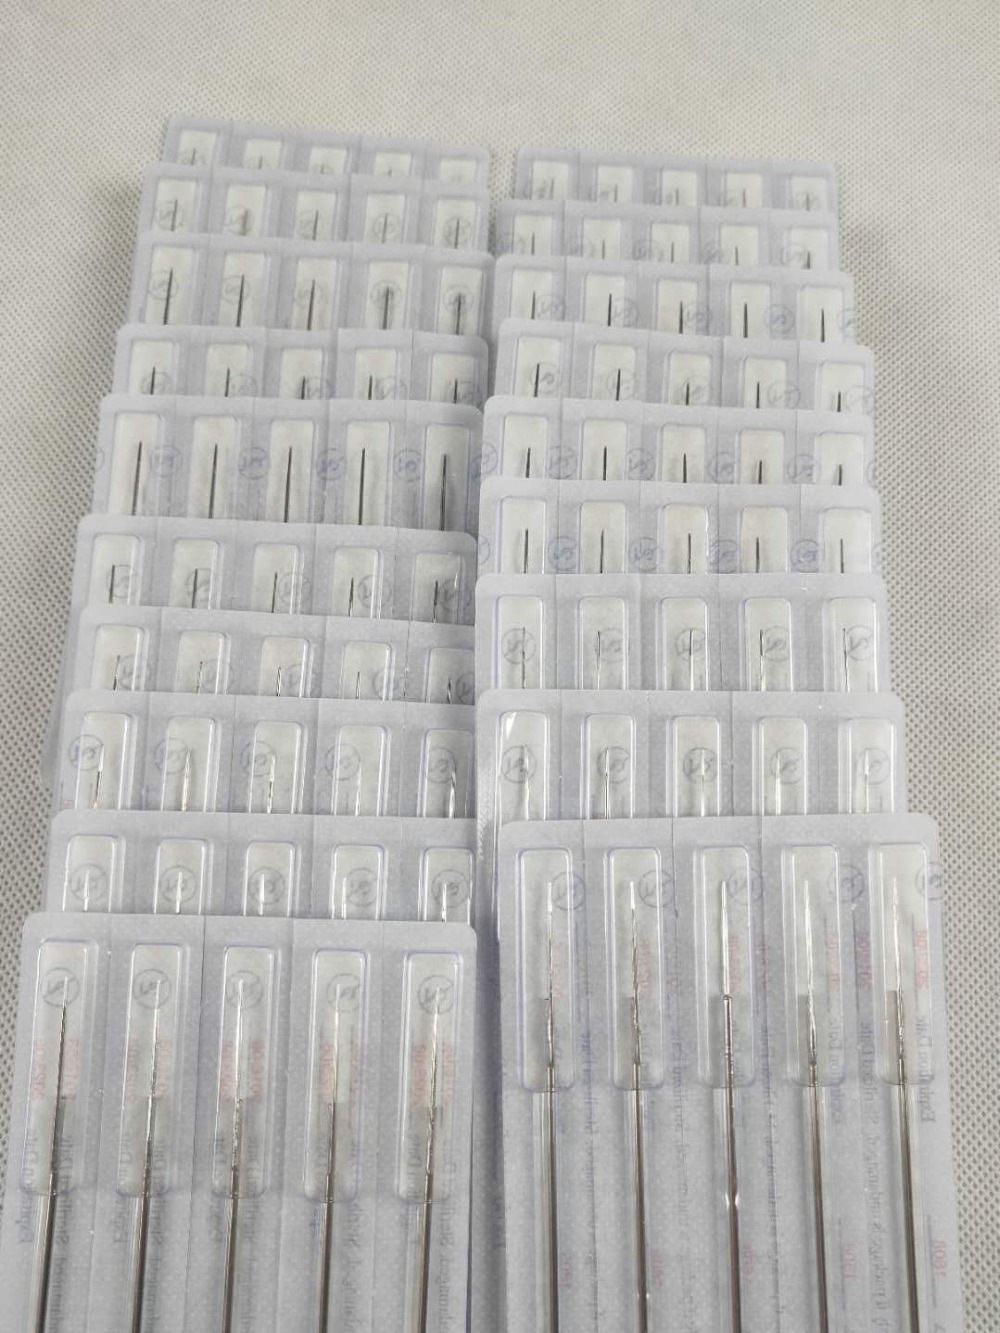 50pcs/Lot Professional Tattoo Needles 3RL Disposable Assorted Sterile 3 Round Liner Needles For Tattoo Body Art Free Shipping